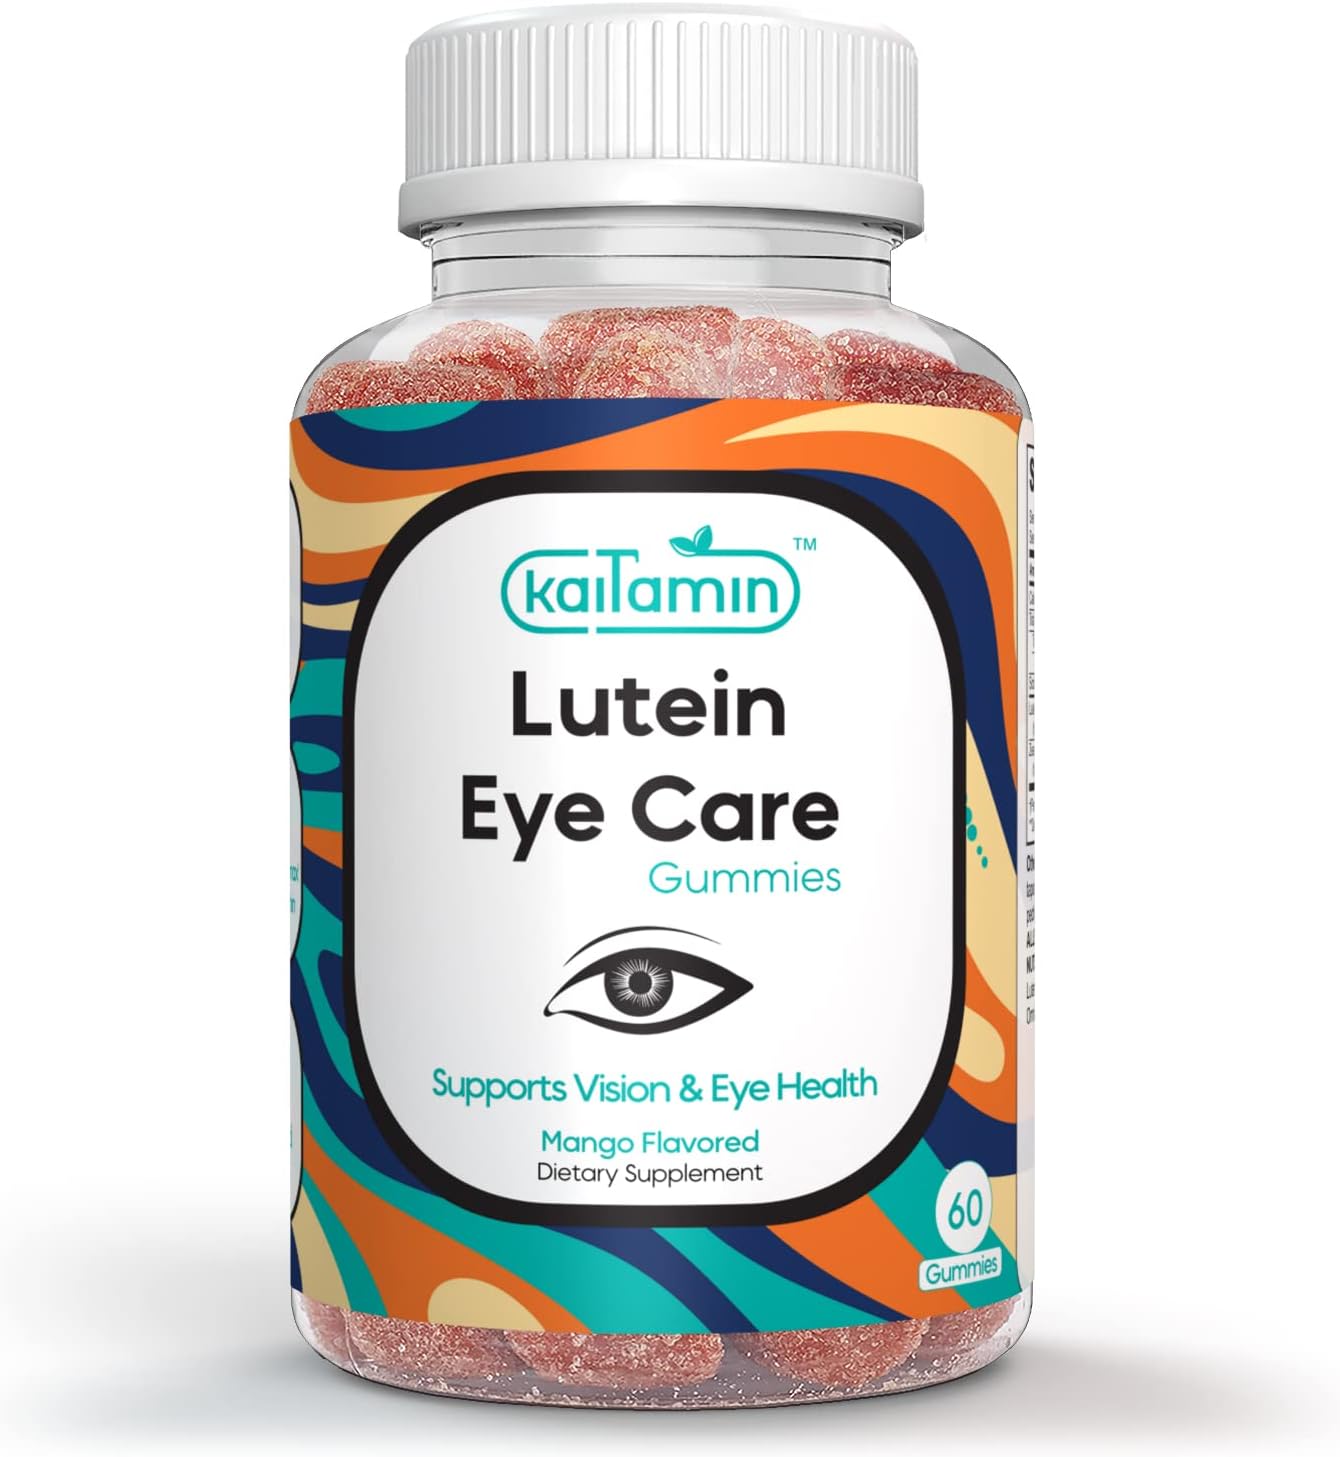 Lutein & Zeaxanthin Eye Supplement for Adults - Protection Support for Eyes - Yummy Mango Flavored Vegan, Glute-Free, Made with Coconut Oil. 60 Gummies